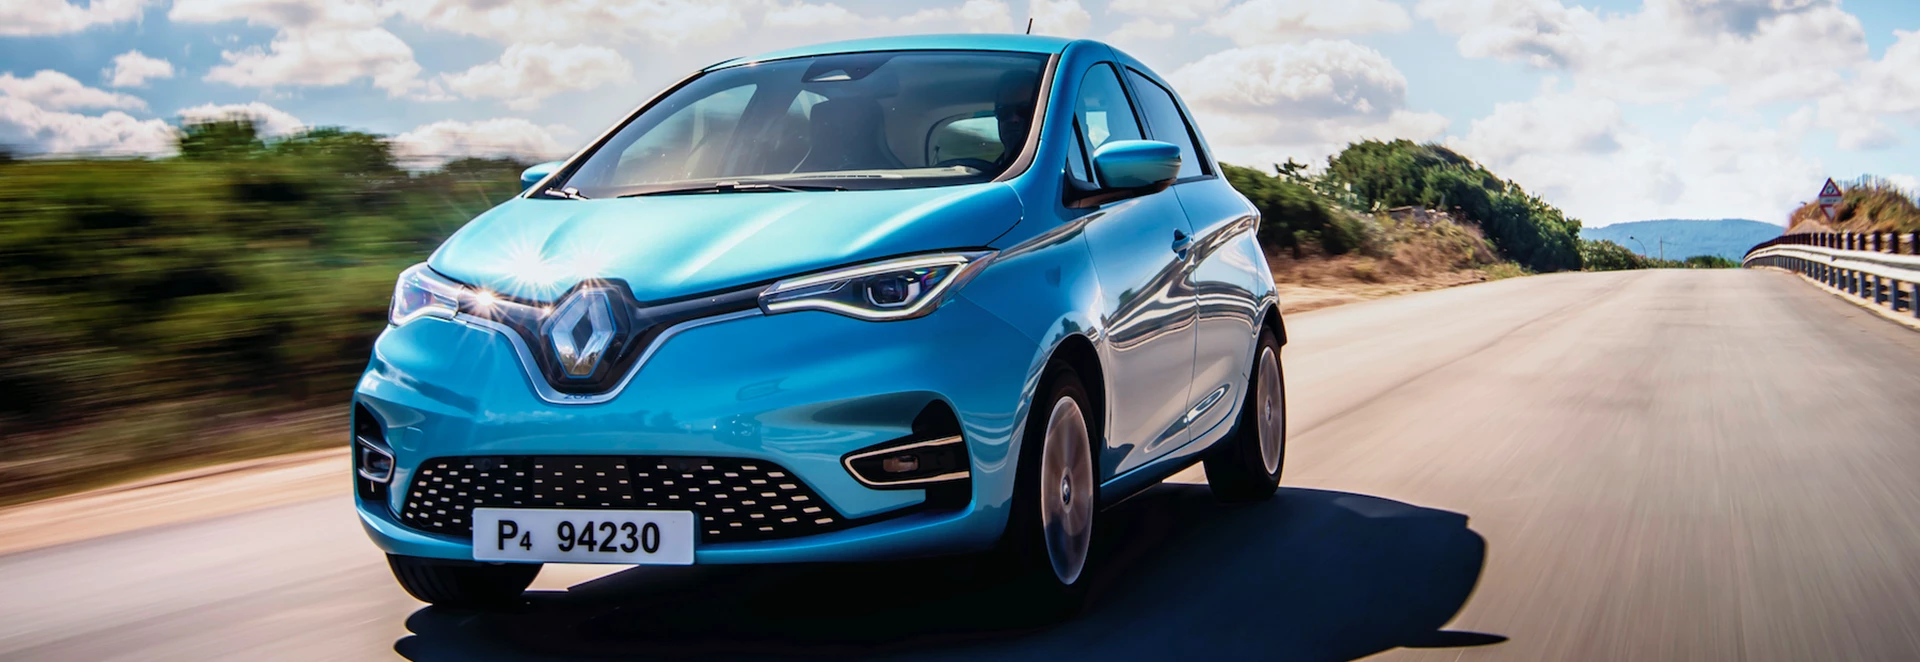 How you can save £1,000 of the price of an all-new Renault Zoe